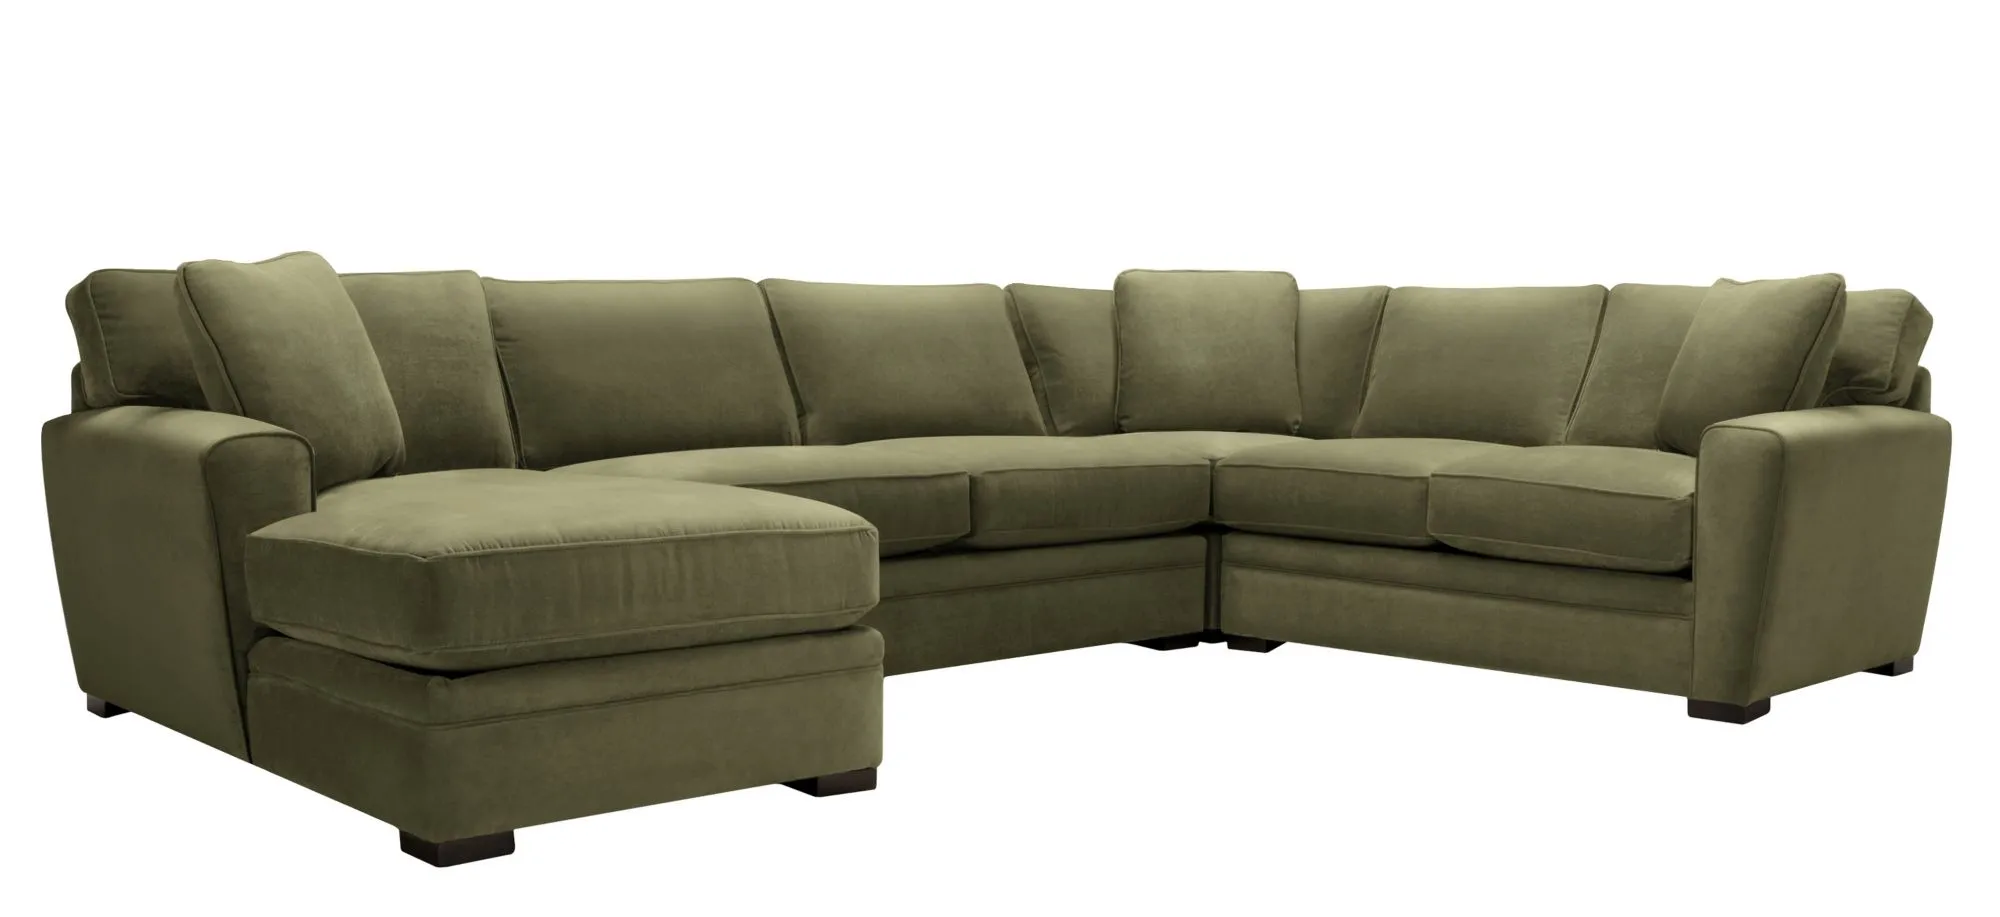 Artemis II 4-pc. Left Hand Facing Sectional Sofa in Gypsy Sage by Jonathan Louis